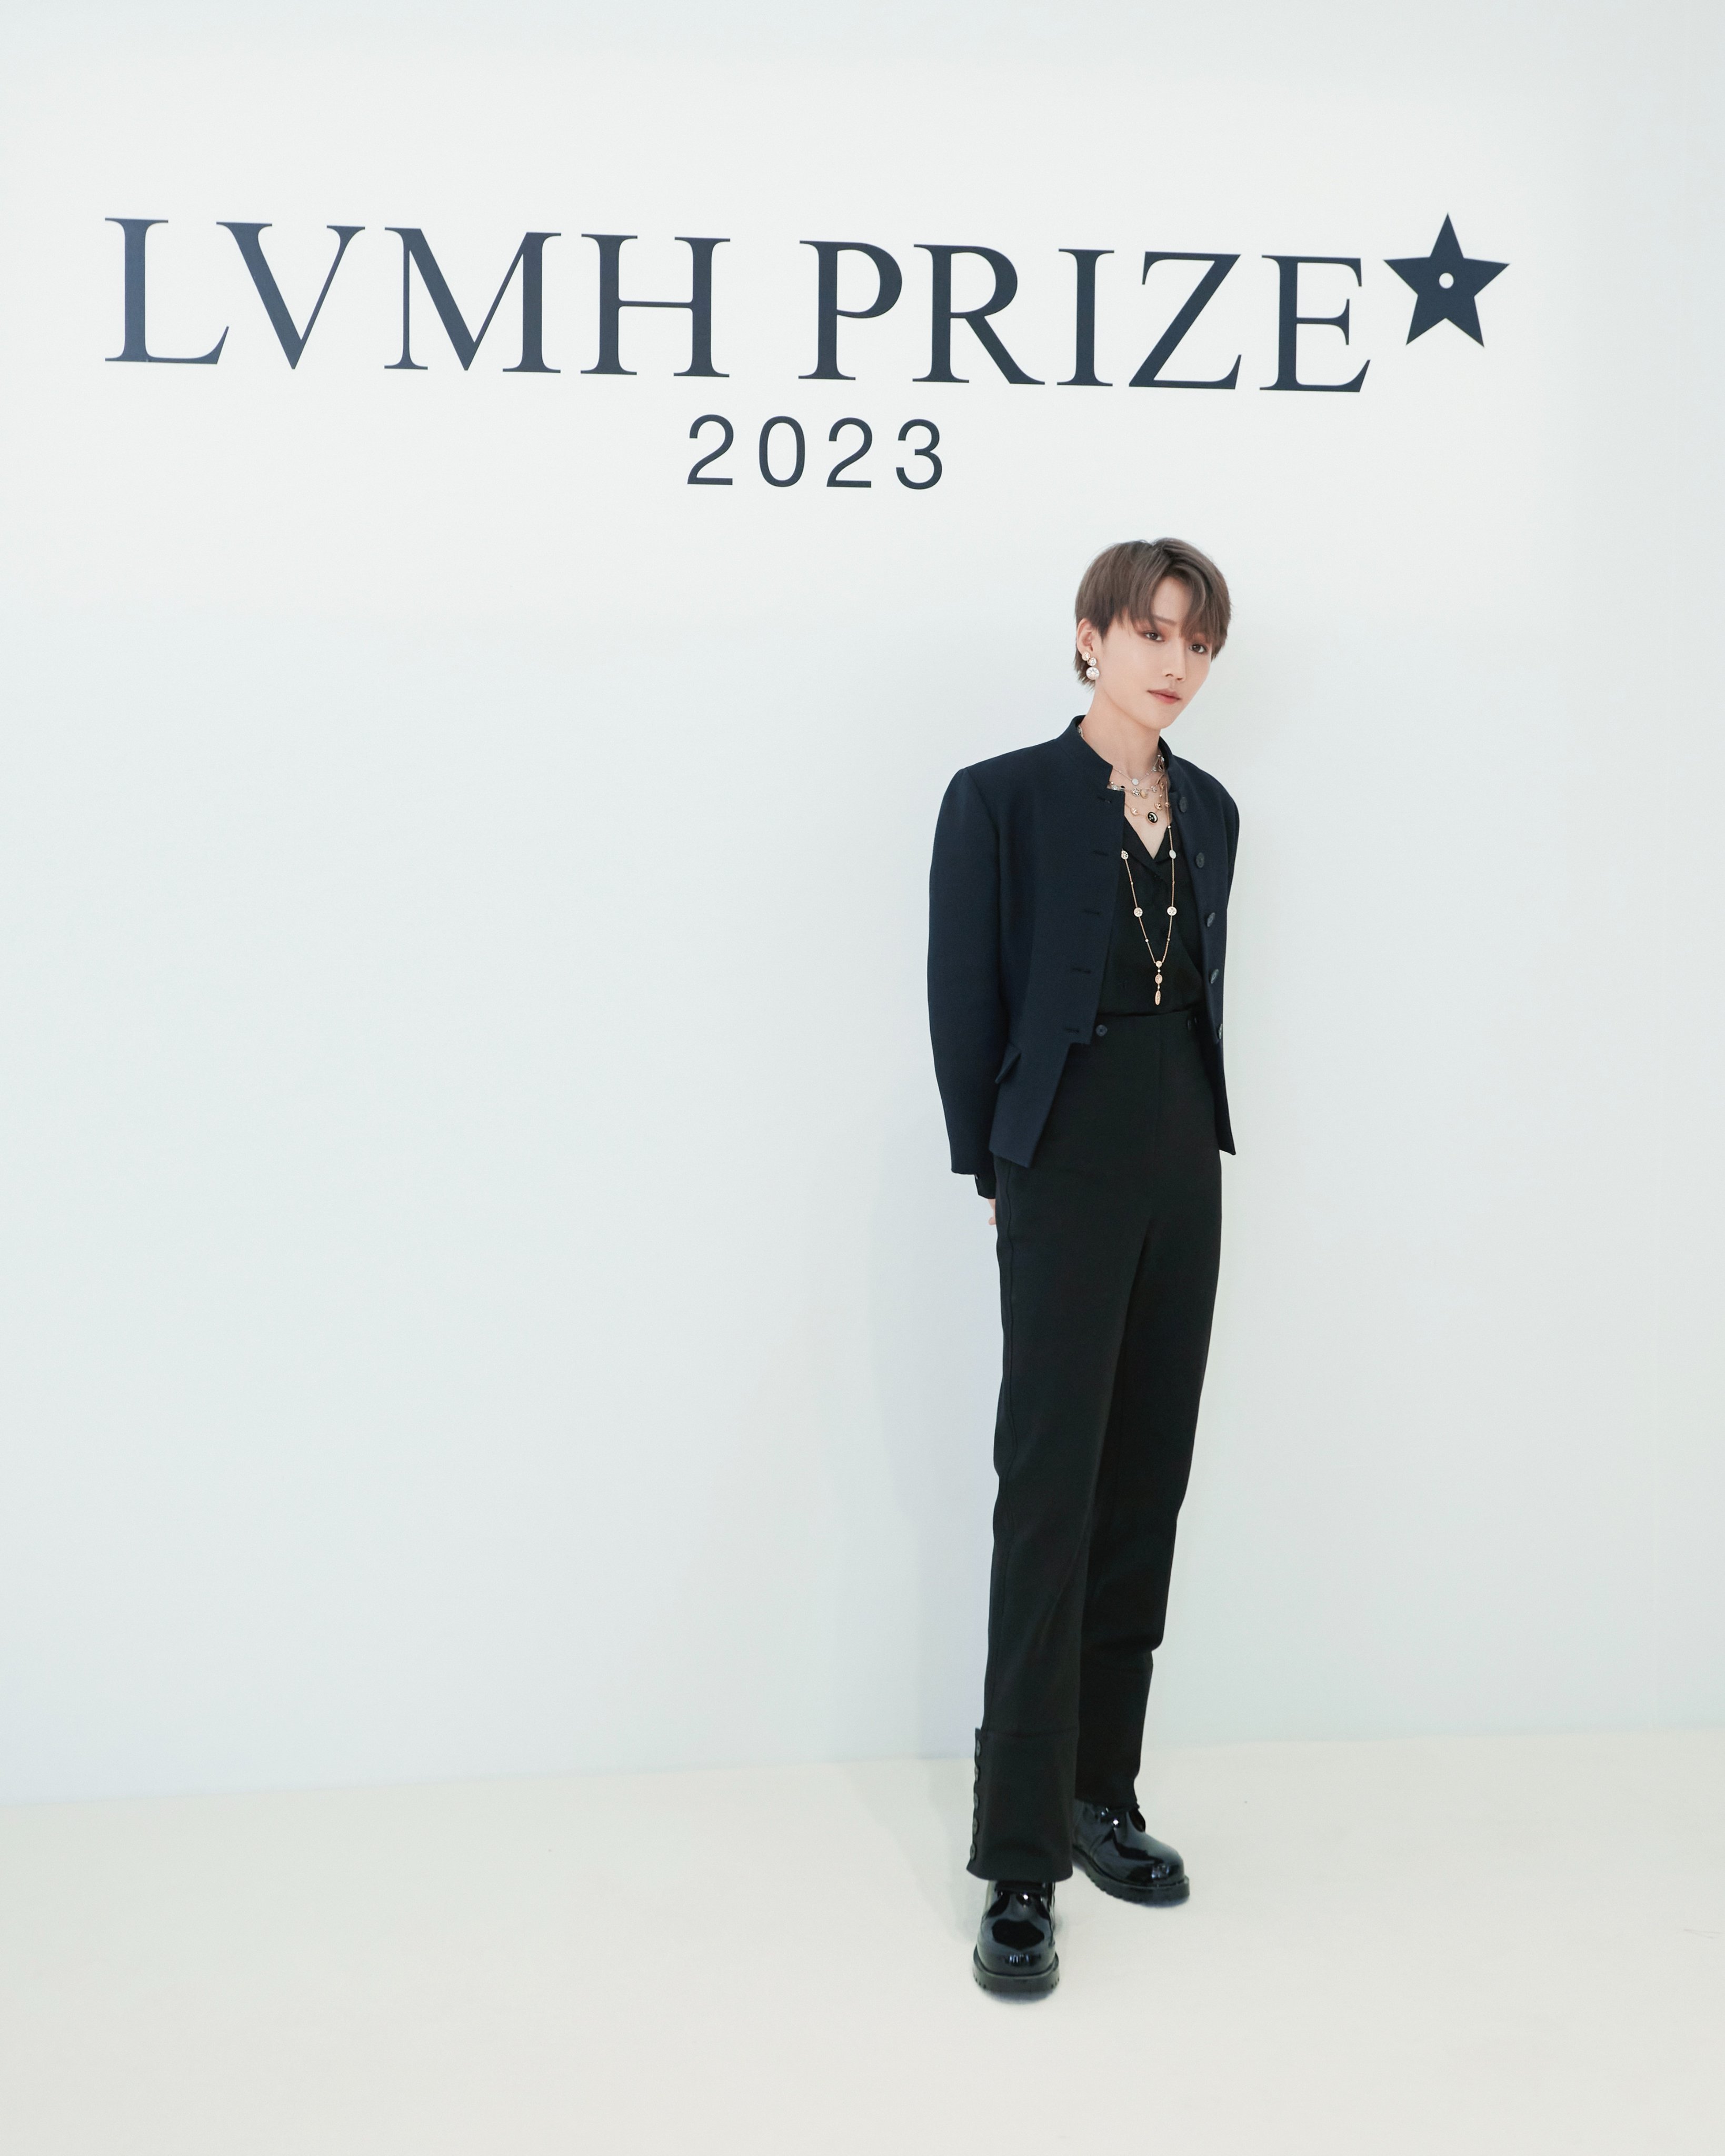 Dior on X: Attending the final of the 2023 LVMH Prize